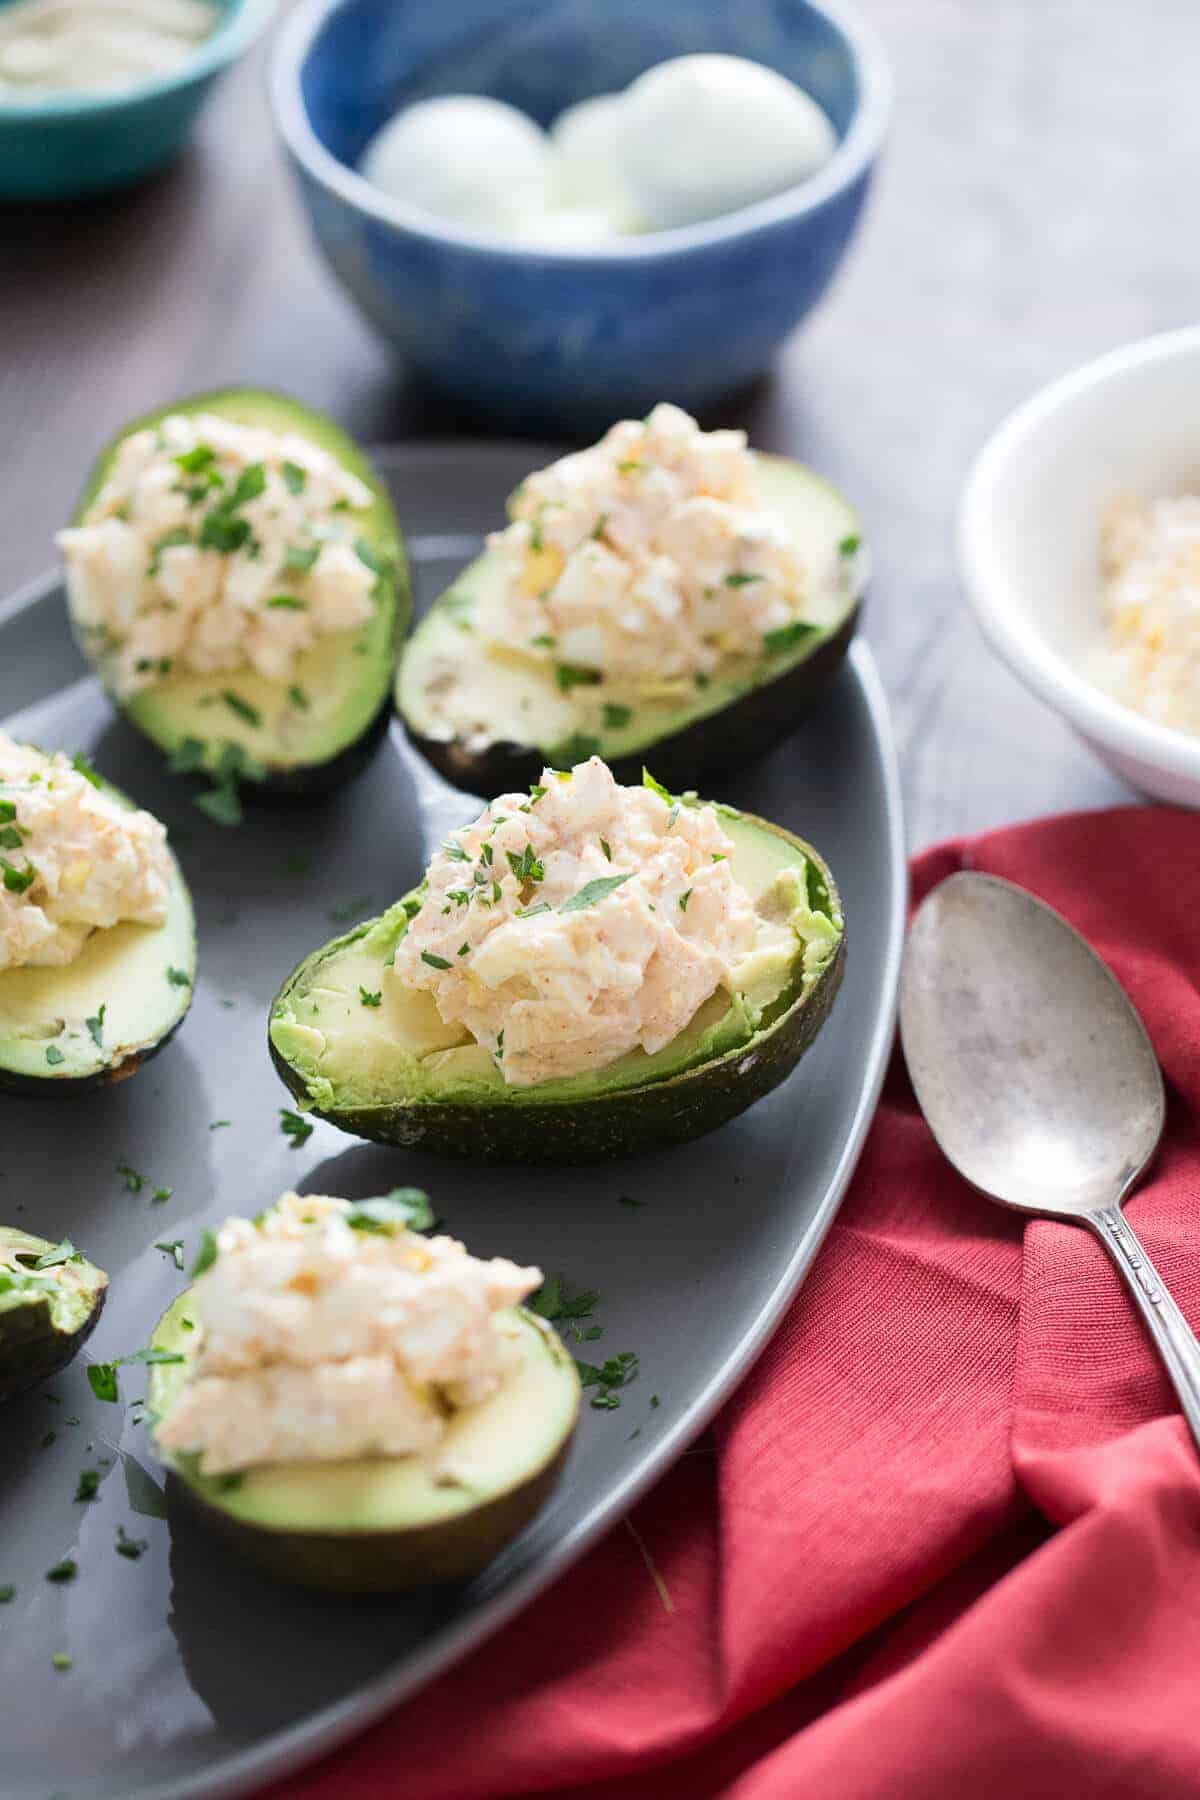 This deviled egg avocado takes deviled eggs to a whole new level! Seasoned egg salad is nestled into the center of avocados for a light lunch or snack!